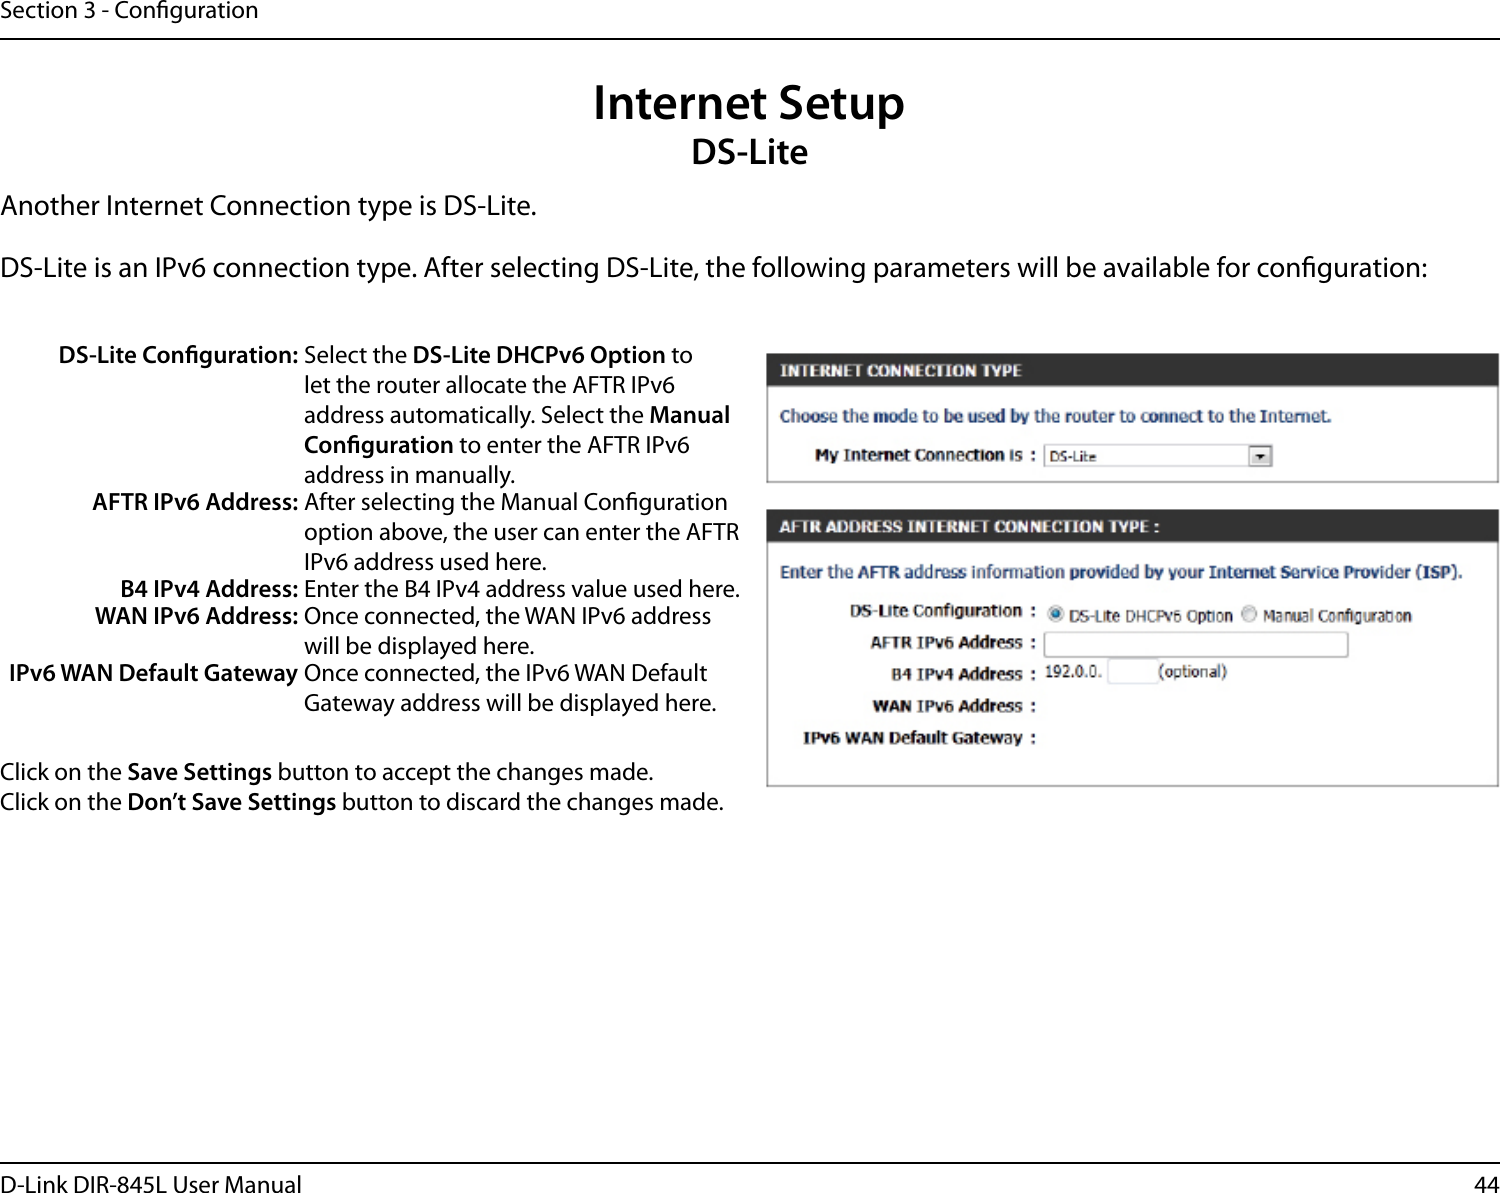 44D-Link DIR-845L User ManualSection 3 - CongurationInternet SetupDS-LiteAnother Internet Connection type is DS-Lite.DS-Lite is an IPv6 connection type. After selecting DS-Lite, the following parameters will be available for conguration:DS-Lite Conguration: Select the DS-Lite DHCPv6 Option to let the router allocate the AFTR IPv6 address automatically. Select the Manual Conguration to enter the AFTR IPv6 address in manually.AFTR IPv6 Address: After selecting the Manual Conguration option above, the user can enter the AFTR IPv6 address used here.B4 IPv4 Address: Enter the B4 IPv4 address value used here.WAN IPv6 Address: Once connected, the WAN IPv6 address will be displayed here.IPv6 WAN Default Gateway Once connected, the IPv6 WAN Default Gateway address will be displayed here.Click on the Save Settings button to accept the changes made.Click on the Don’t Save Settings button to discard the changes made.